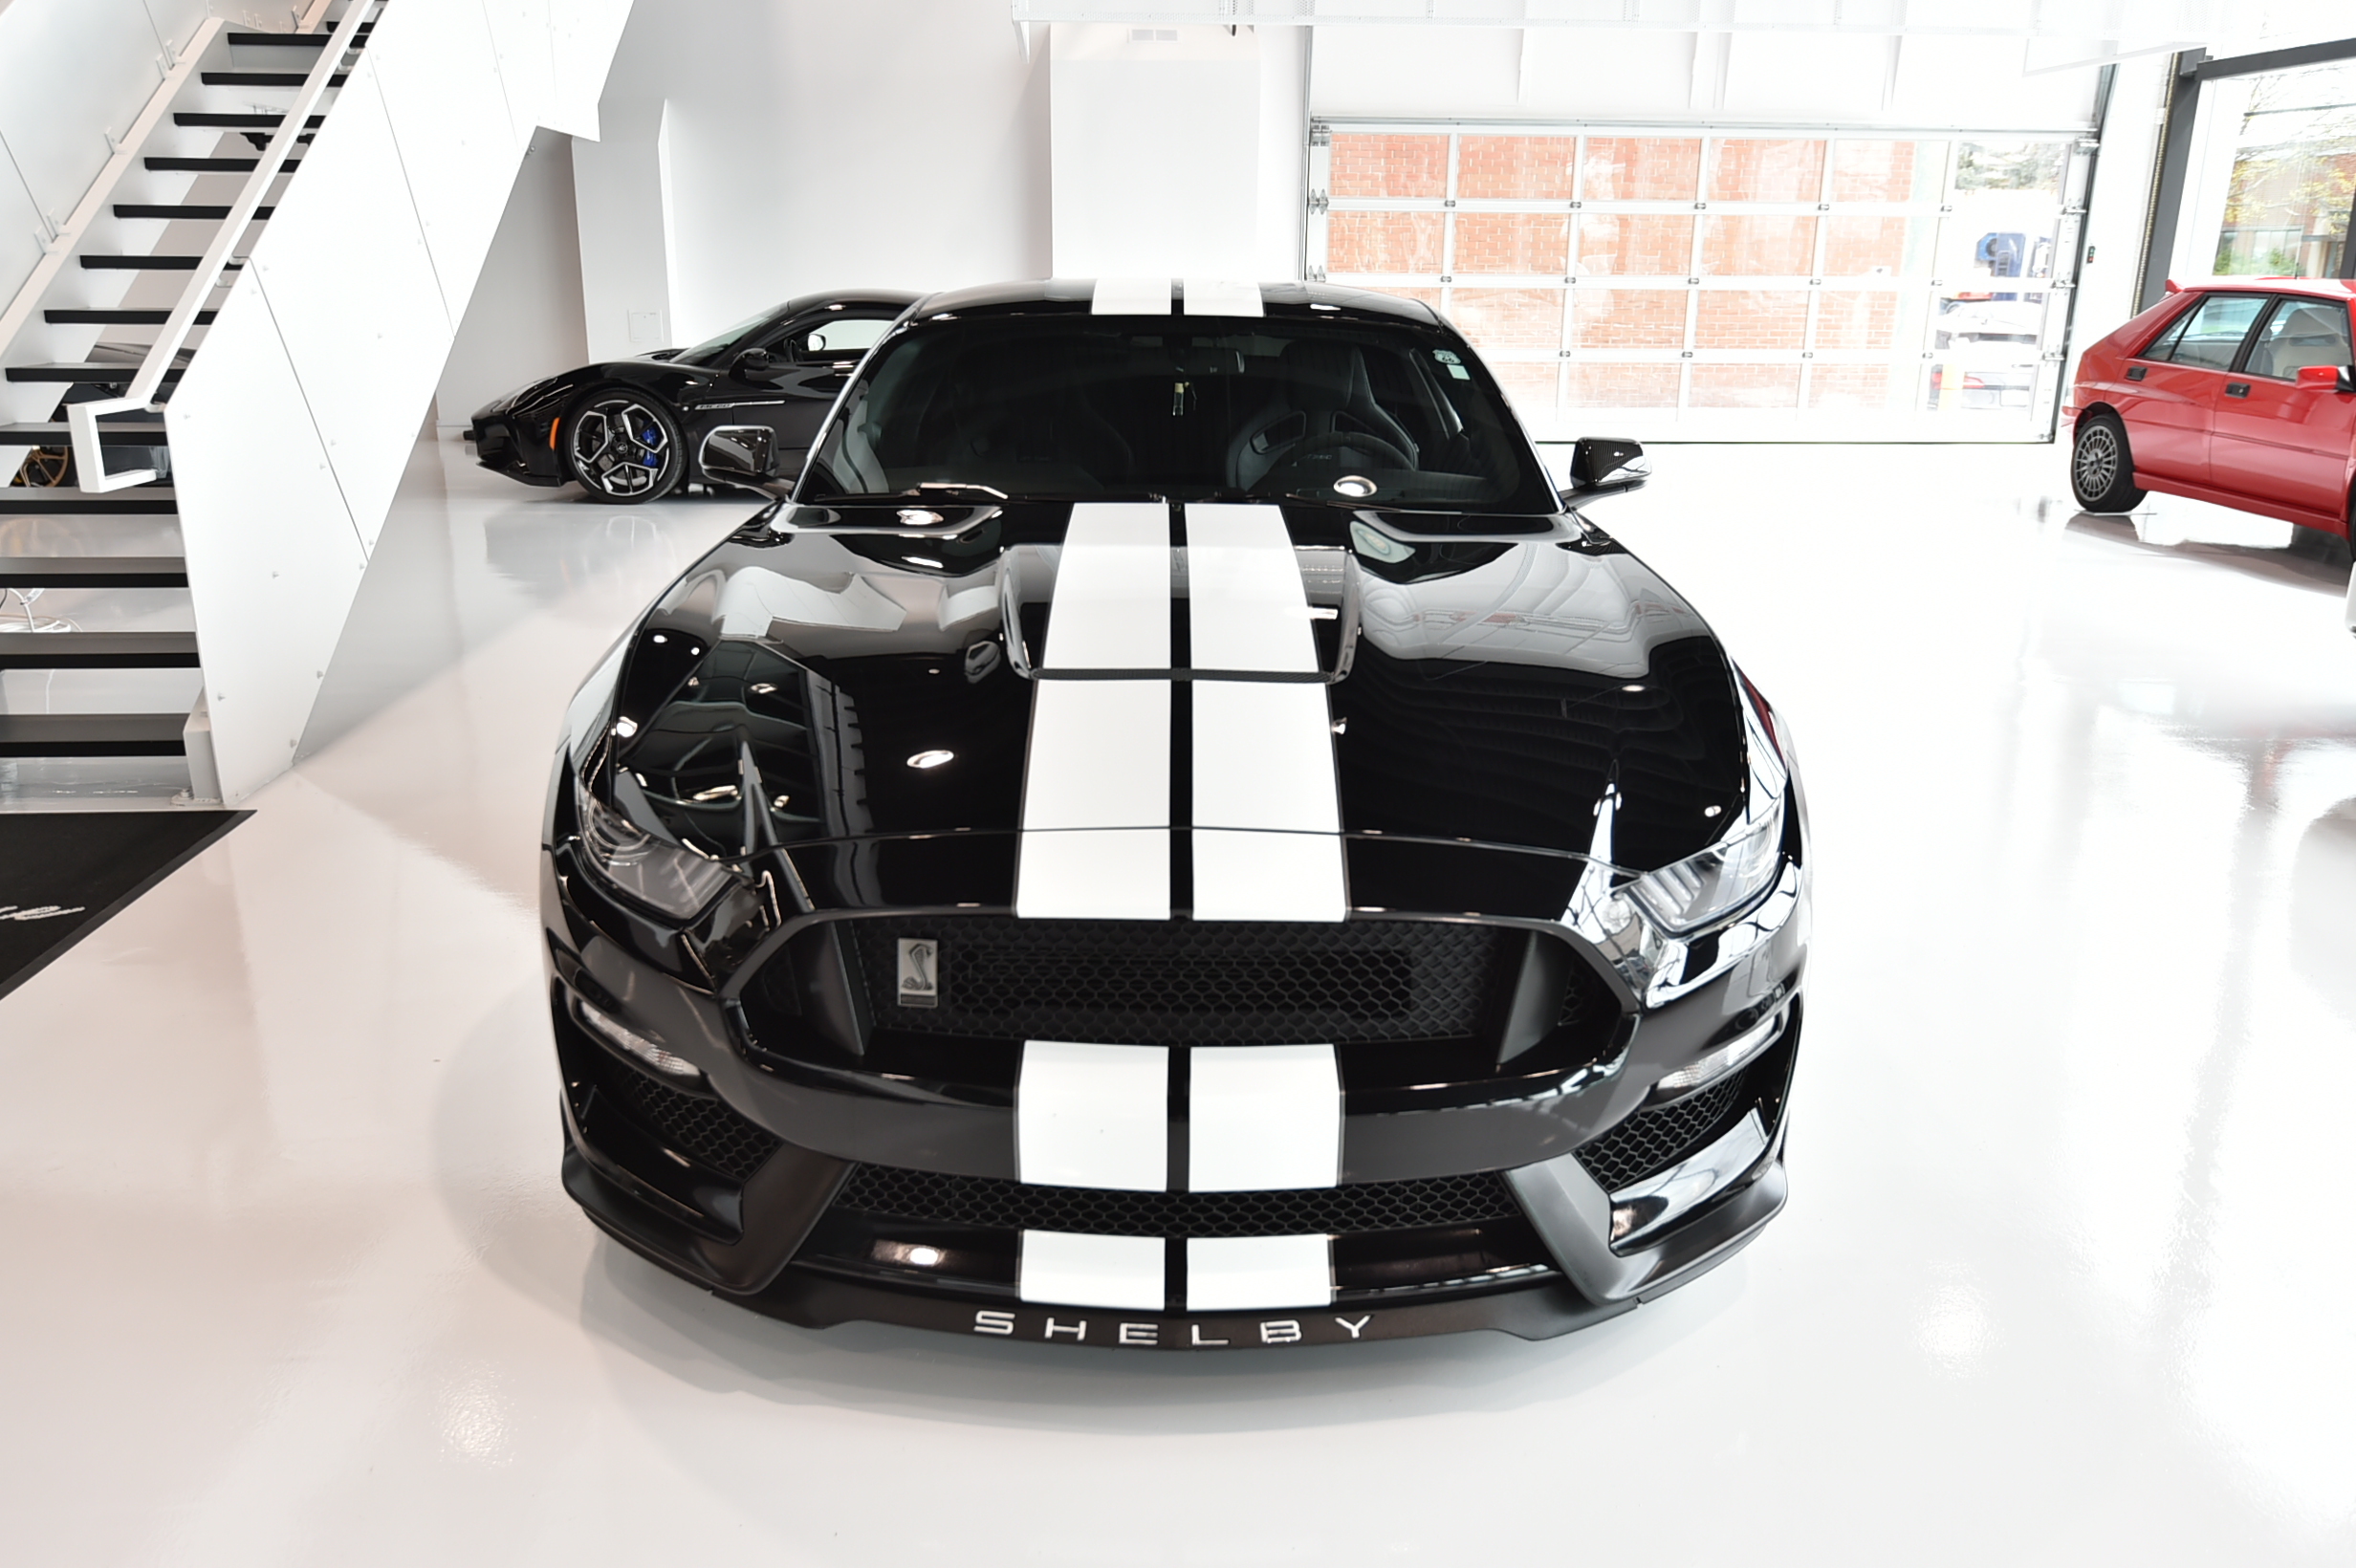 2019 Ford Mustang Shelby GT350 Fastback